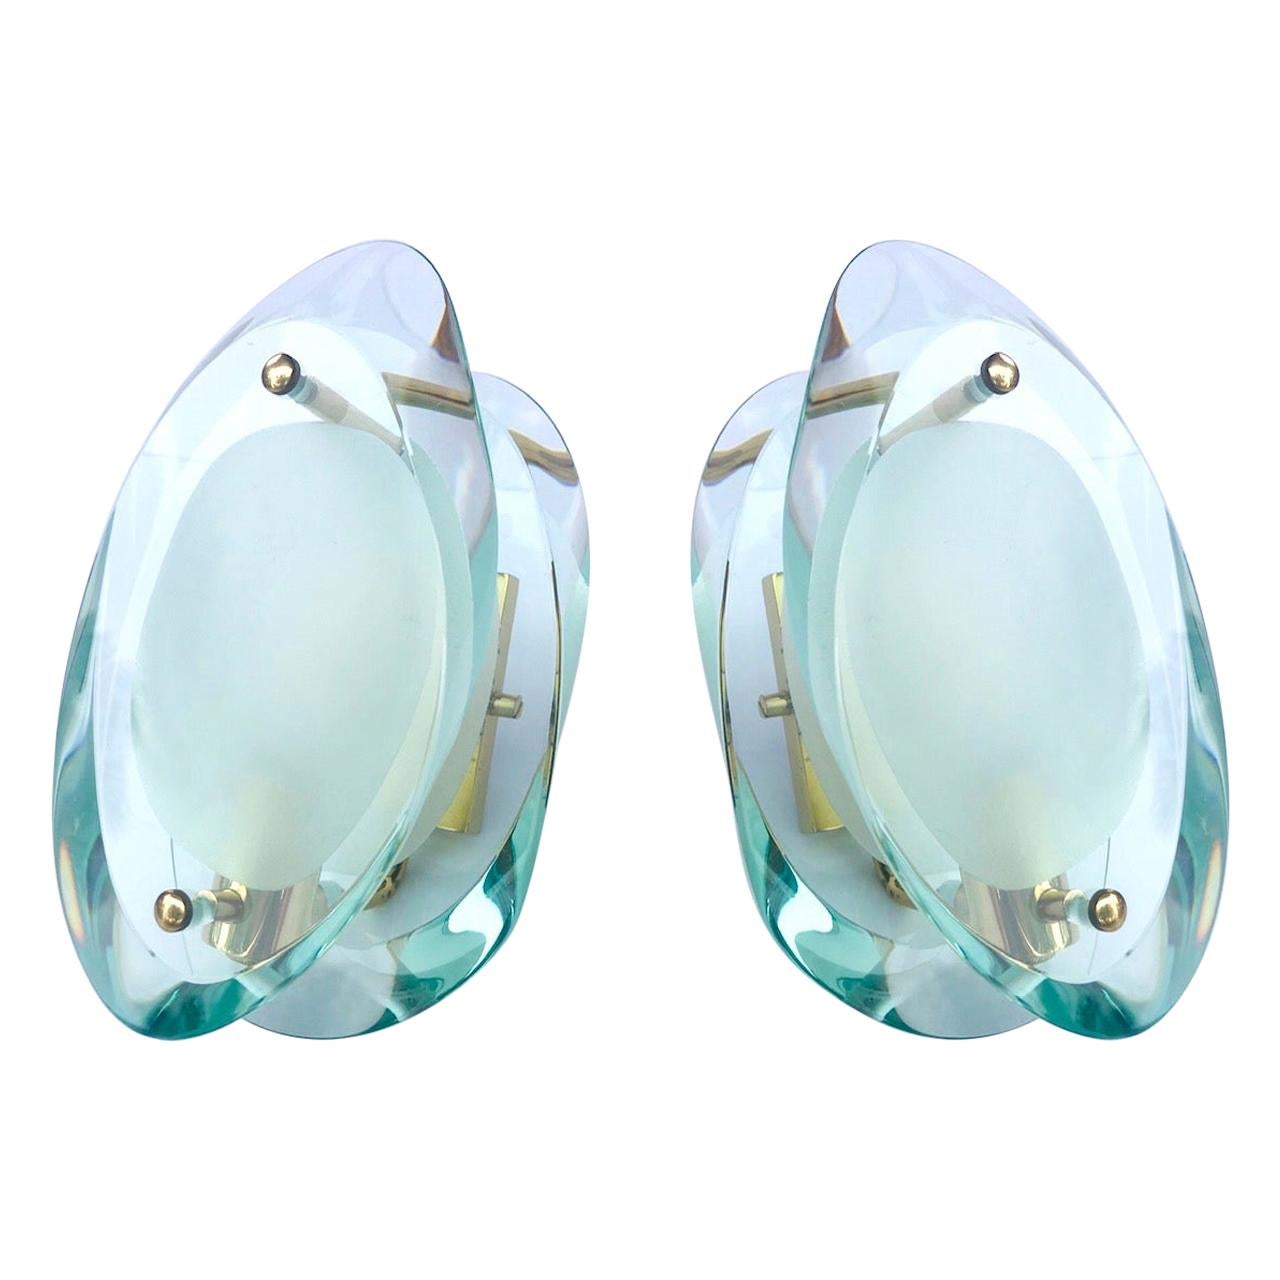 Pair of Italian Glass Sconces by Max Ingrand for Fontana Arte, 1960s